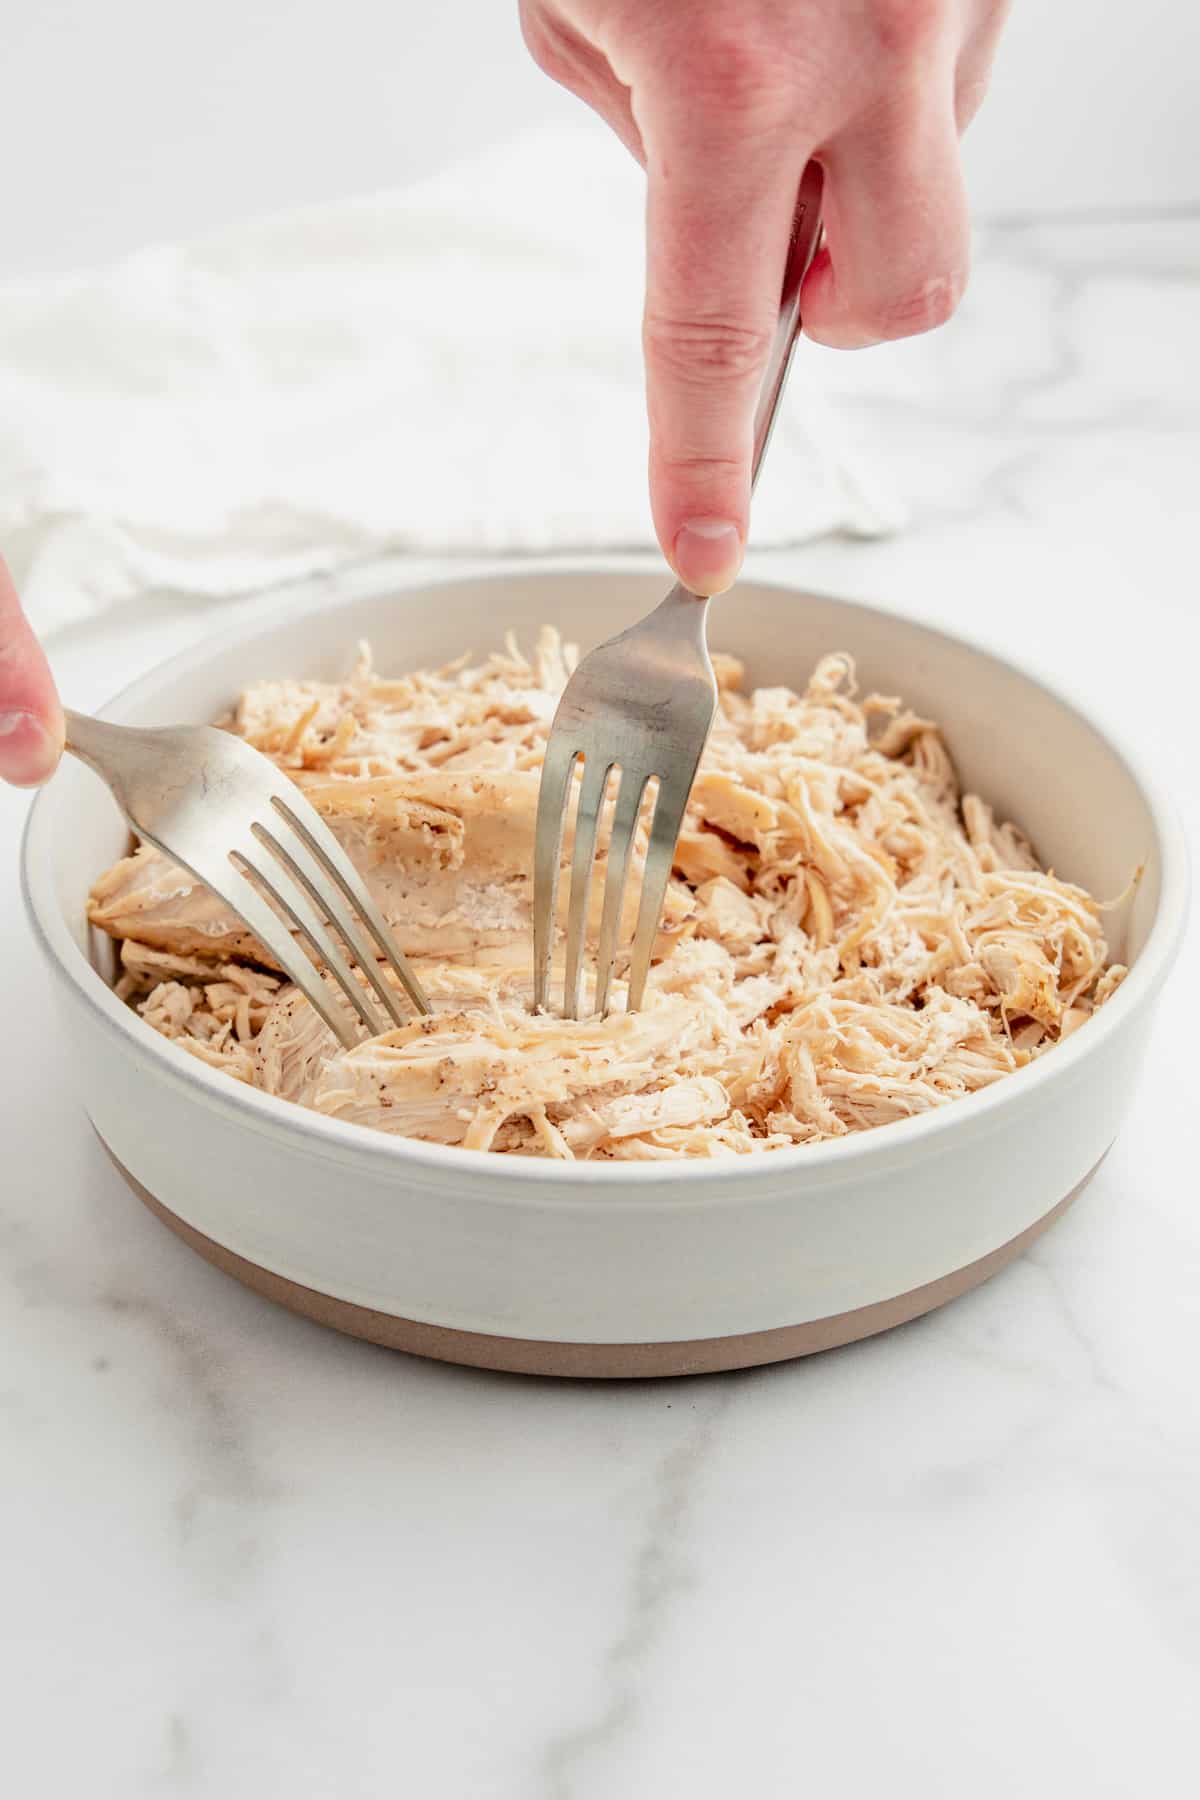 Shredding chicken breasts with two forks.